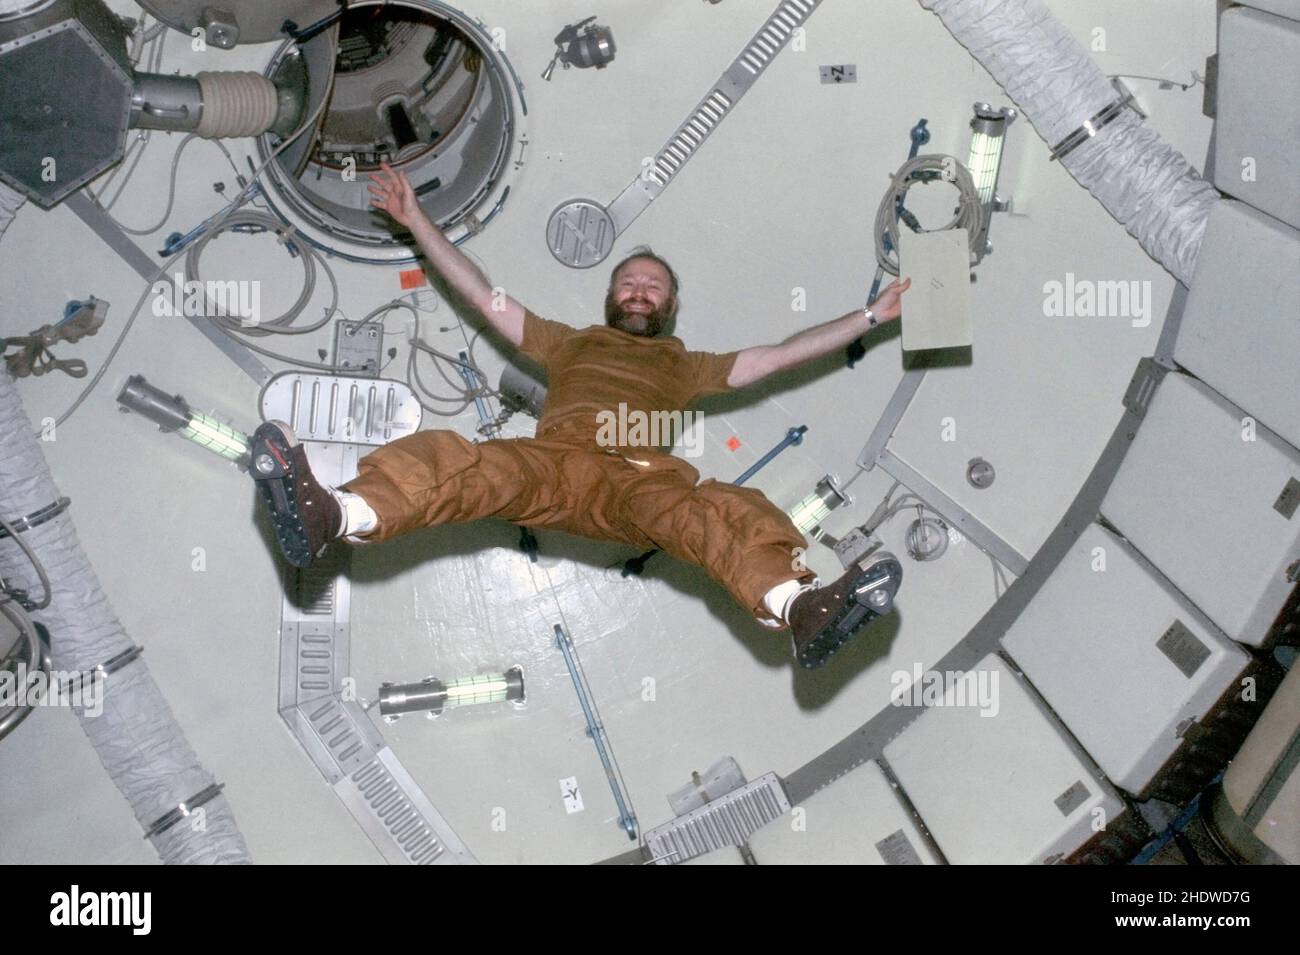 Astronaut Gerald P. Carr, commander for the Skylab 4 mission, demonstrates the effects of zero-gravity as he floats in the forward dome area of the Orbital Workshop of the Skylab space station while in Earth orbit. Stock Photo